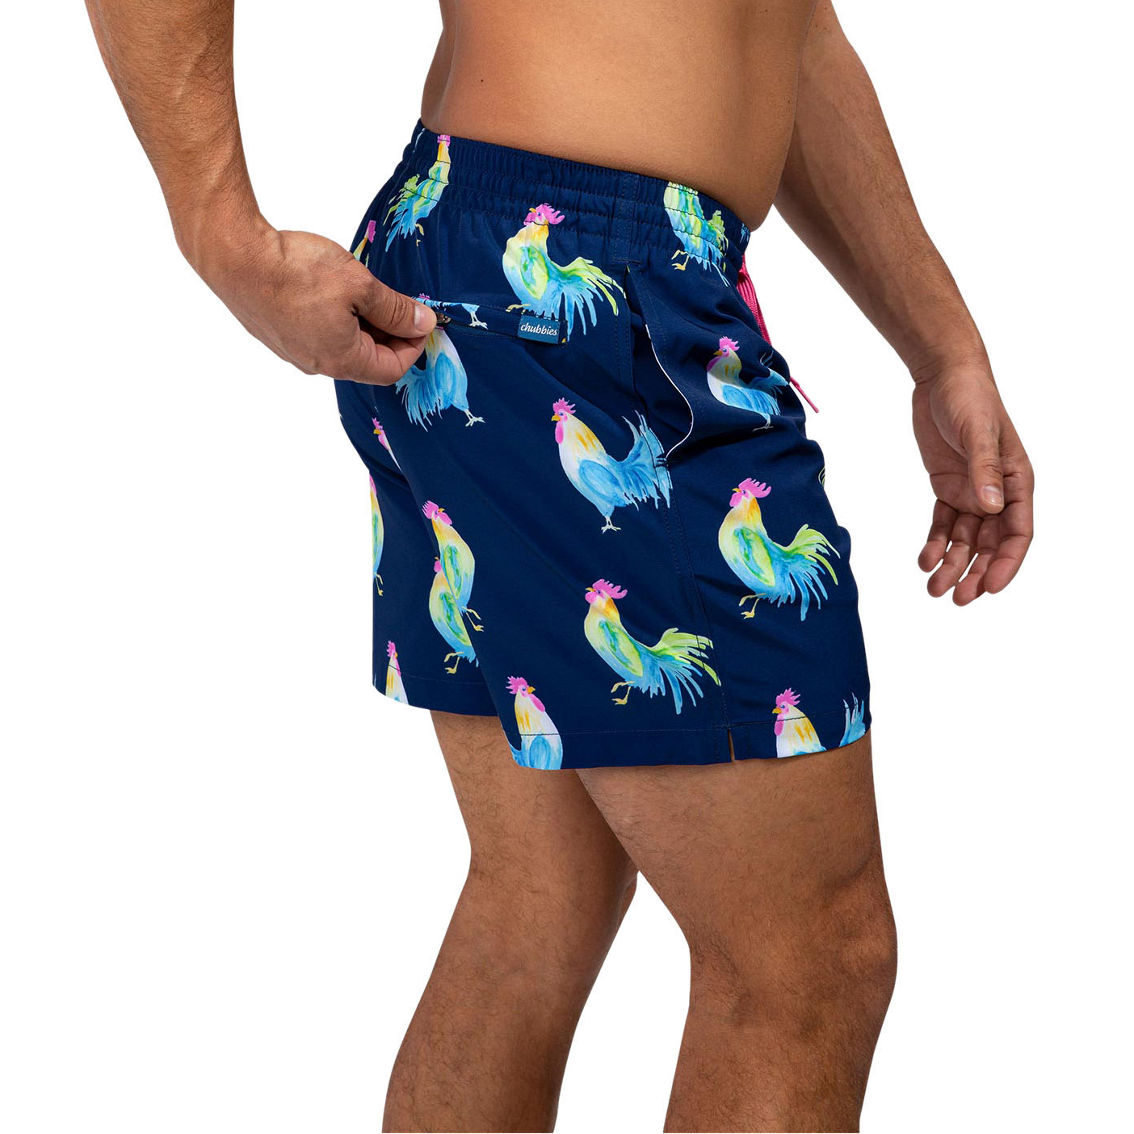 Chubbies The Fowl Plays 5.5 in. Lined Classic Swim Trunks - Image 2 of 2